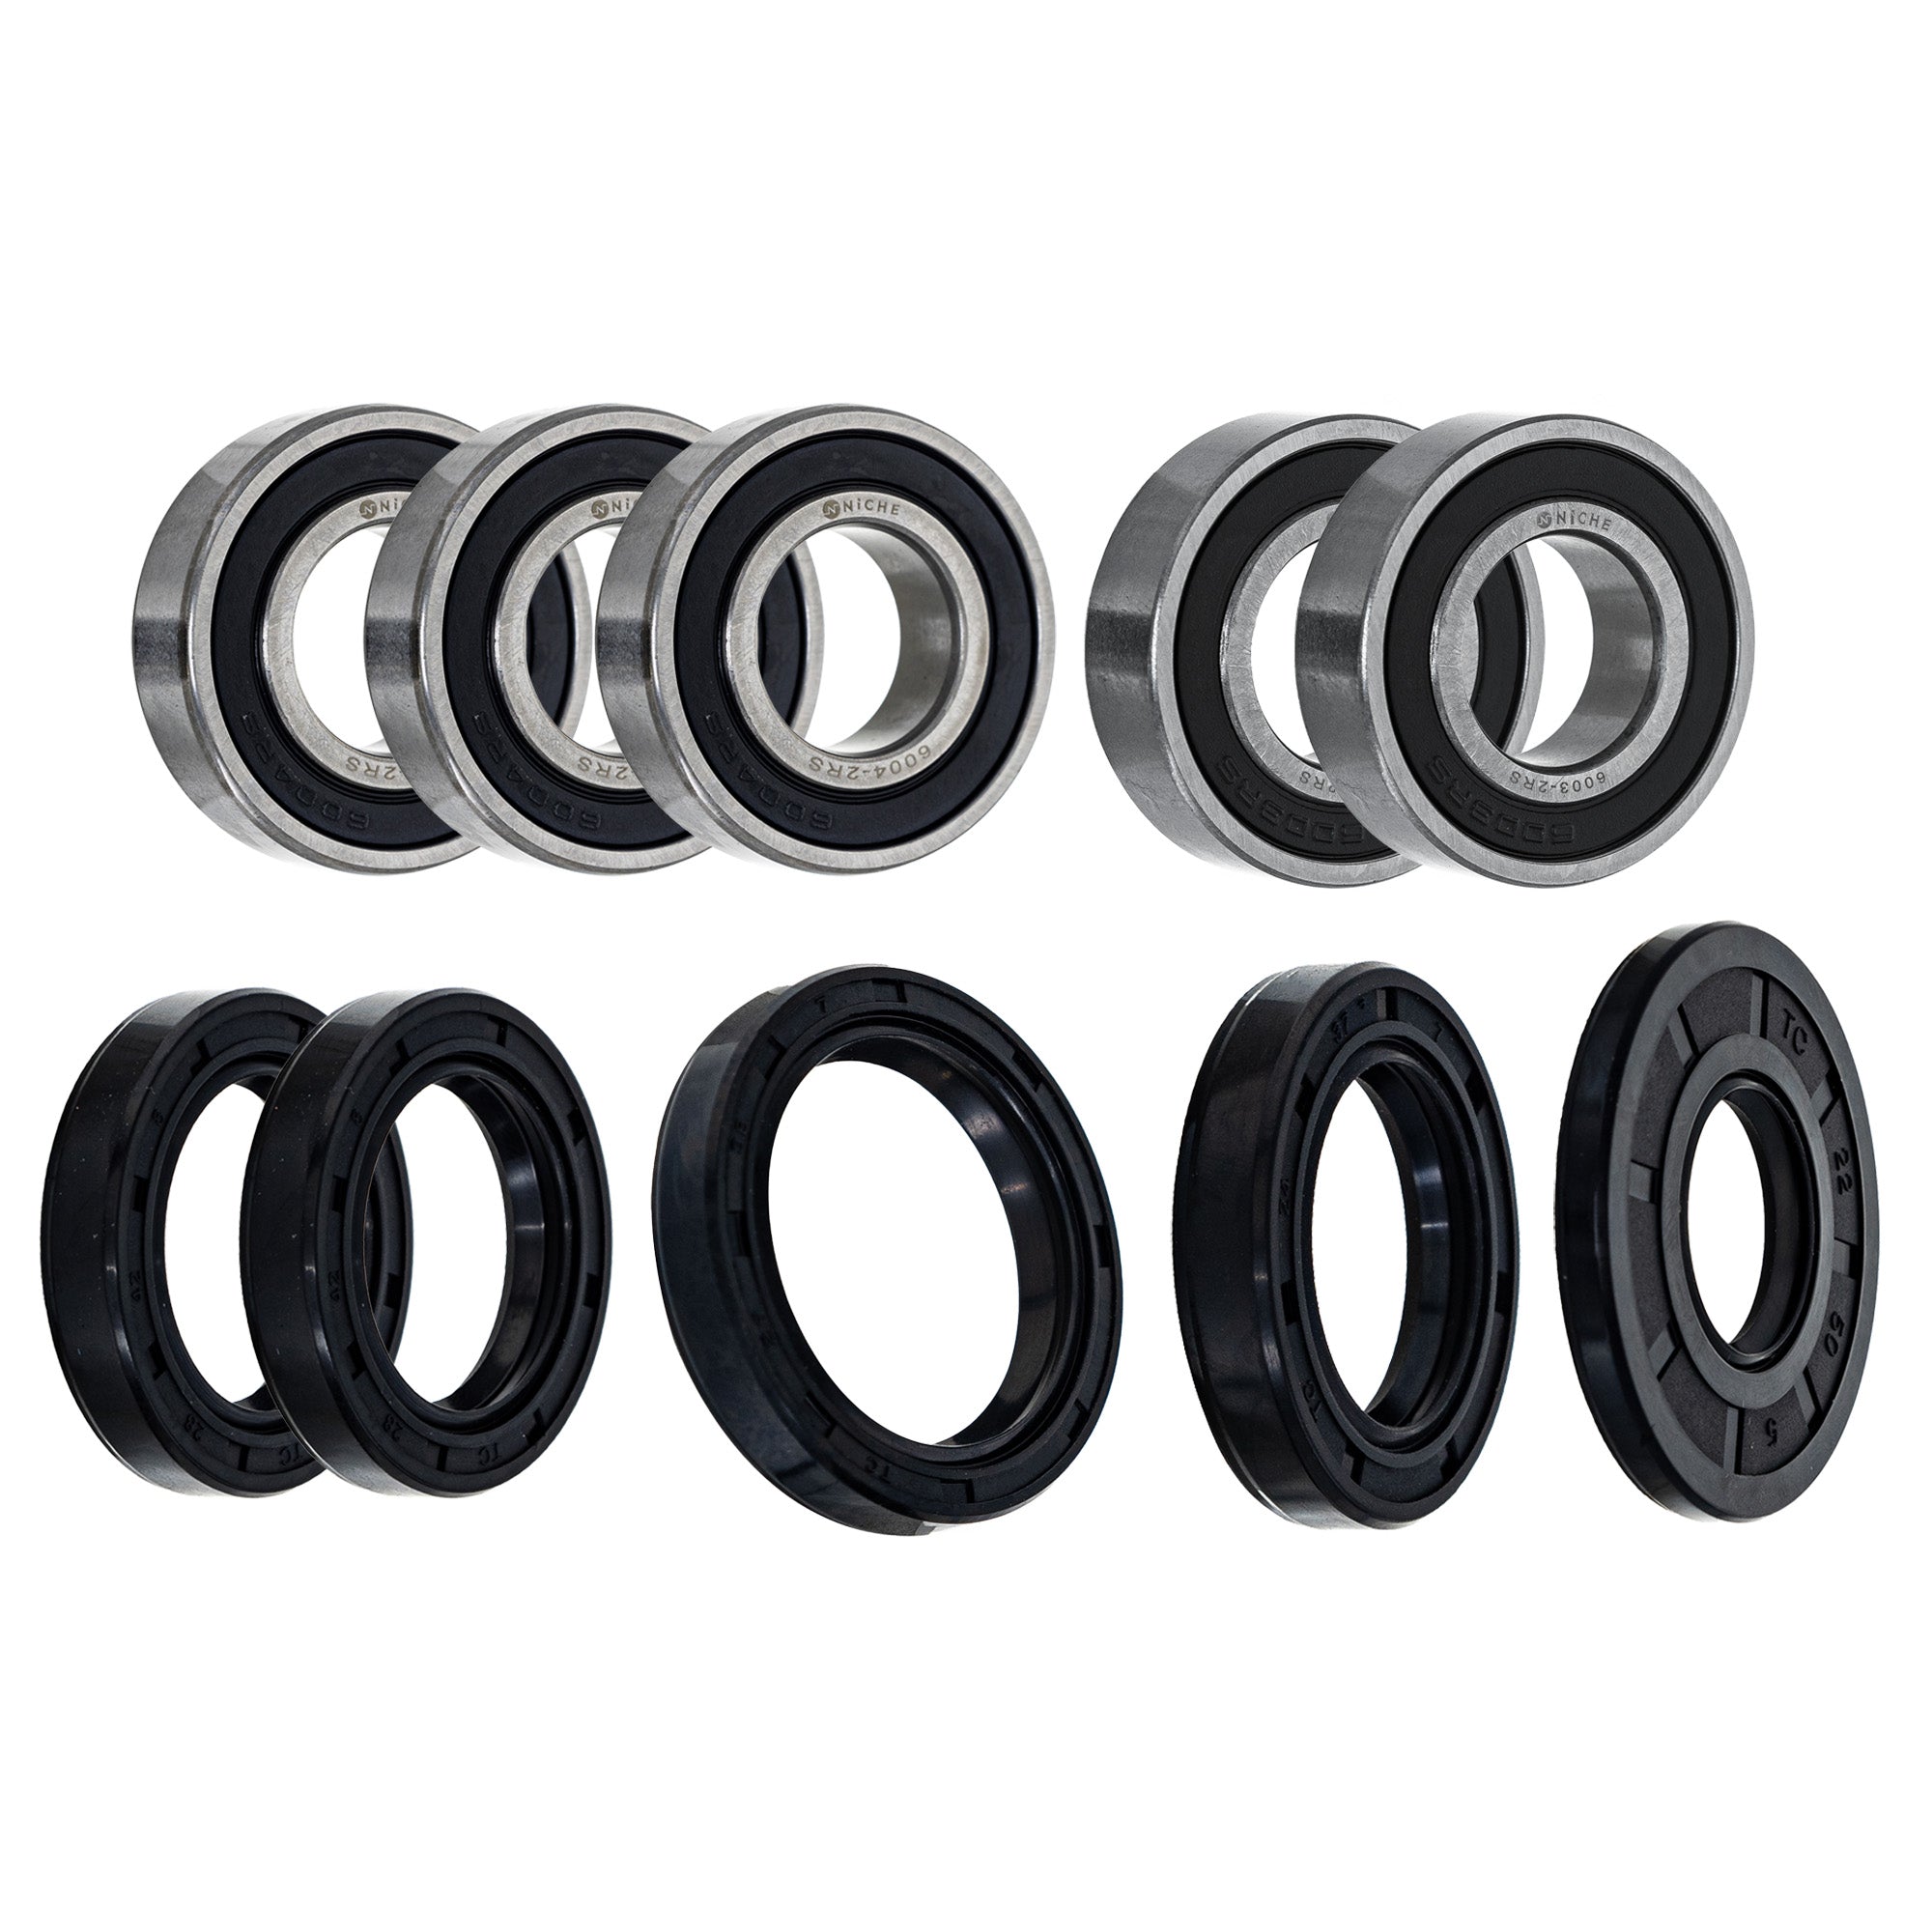 Wheel Bearing Seal Kit for zOTHER Ref No CR500R CR250R CR125R NICHE MK1008800